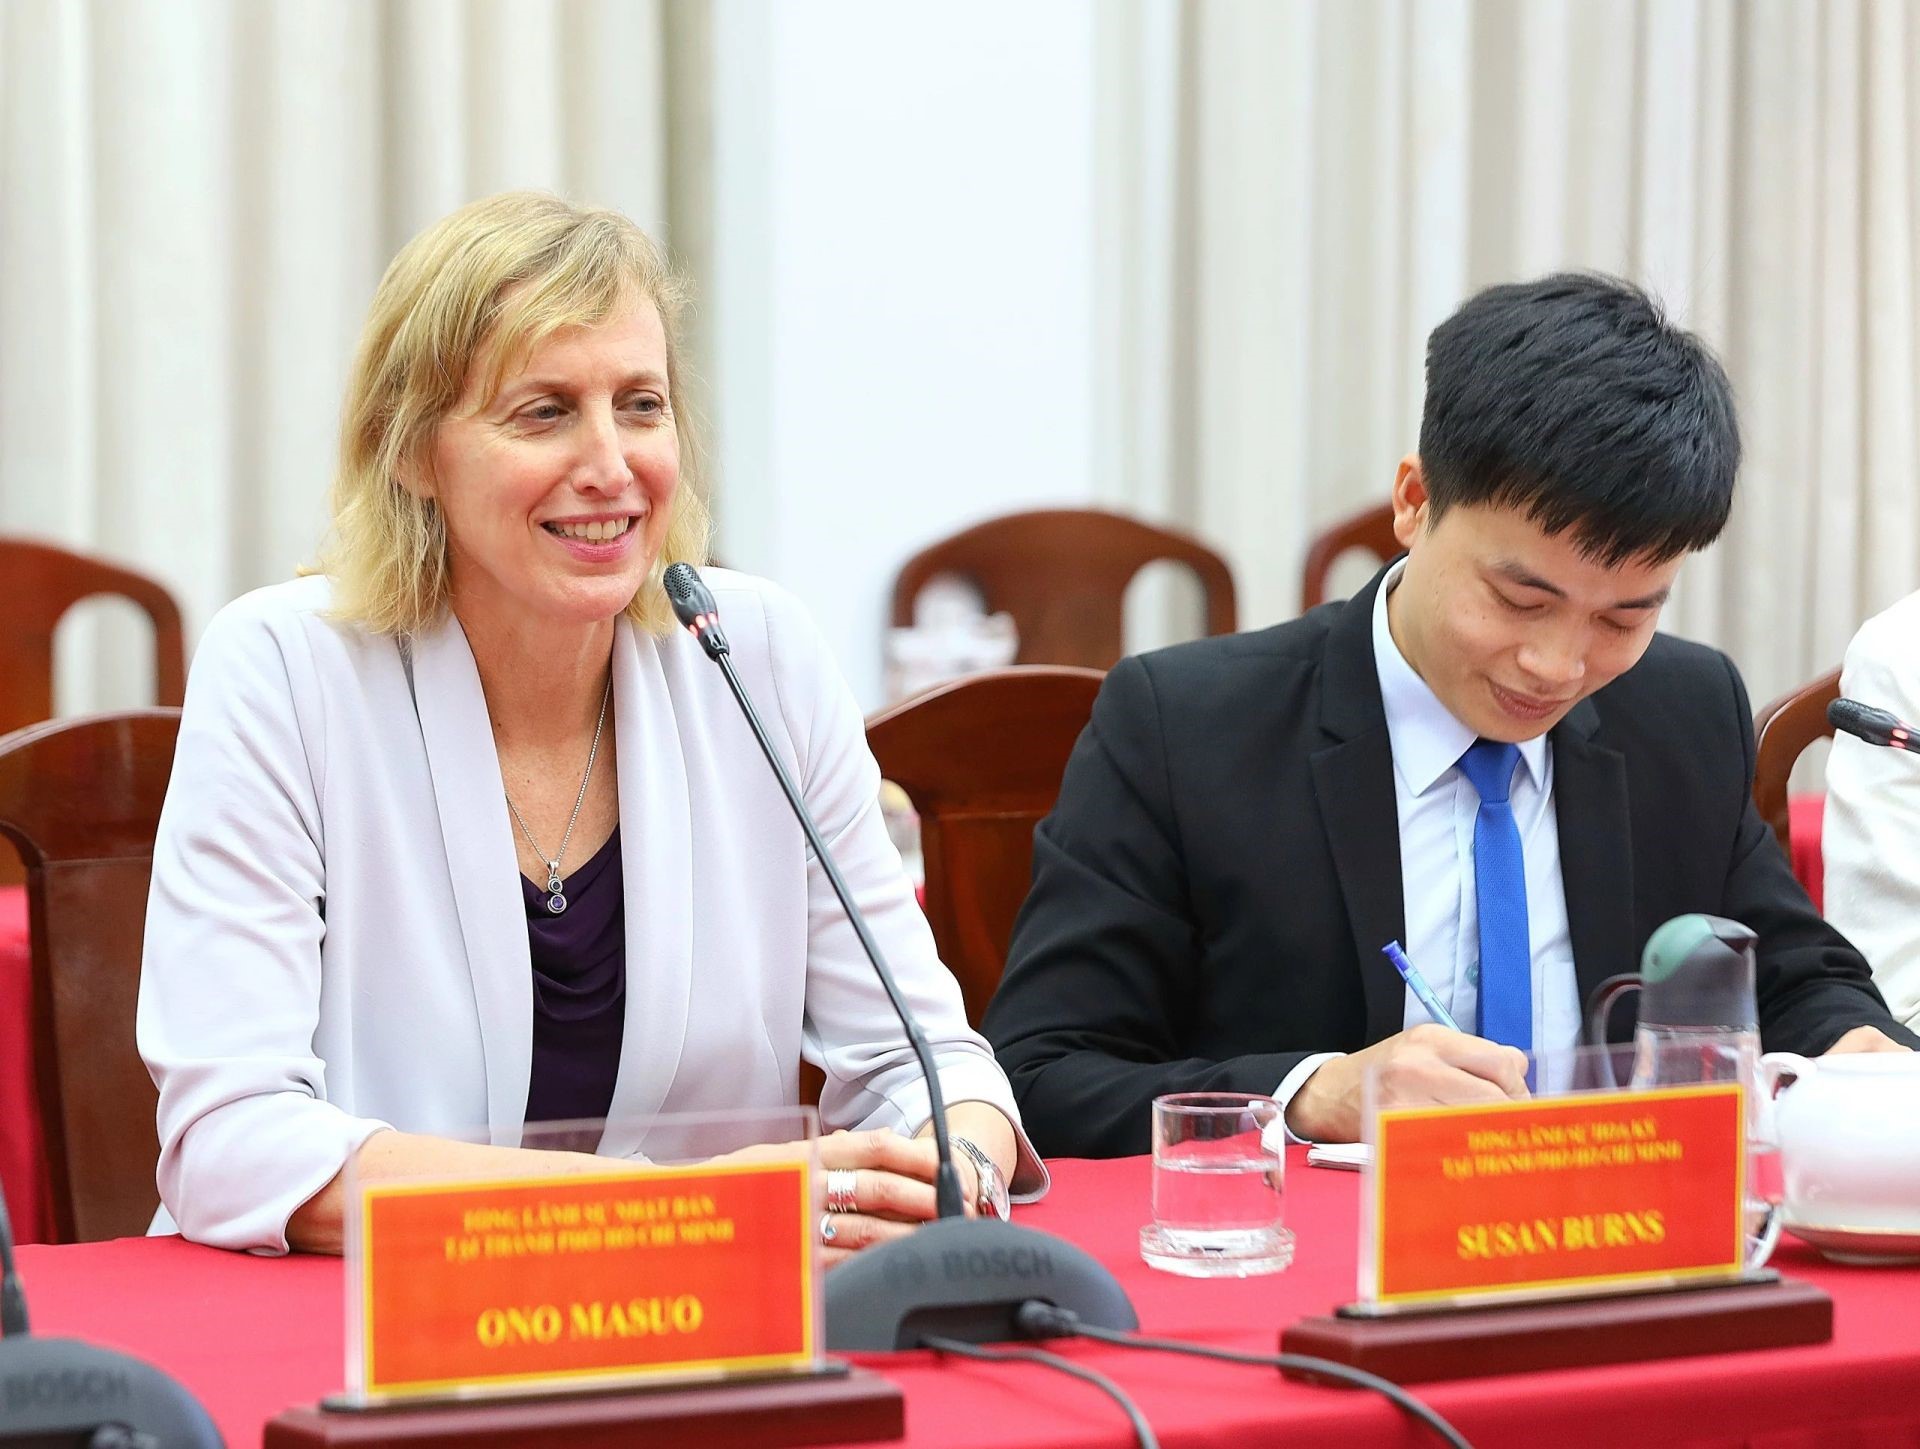 Ms Susan Burns - US Consul General in City. Ho Chi Minh spoke at the working session.